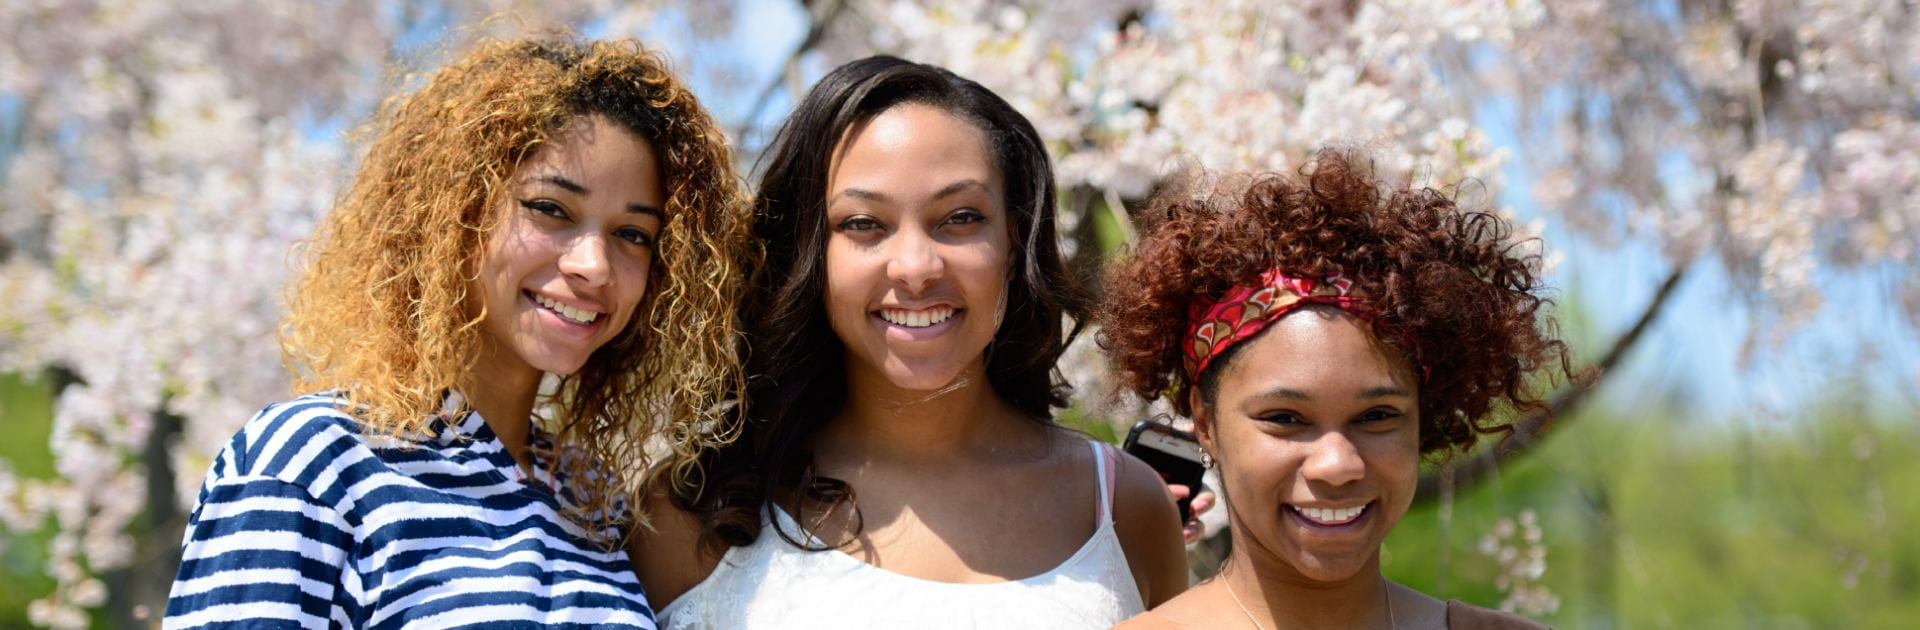 Three students posing for a photo outside in spring